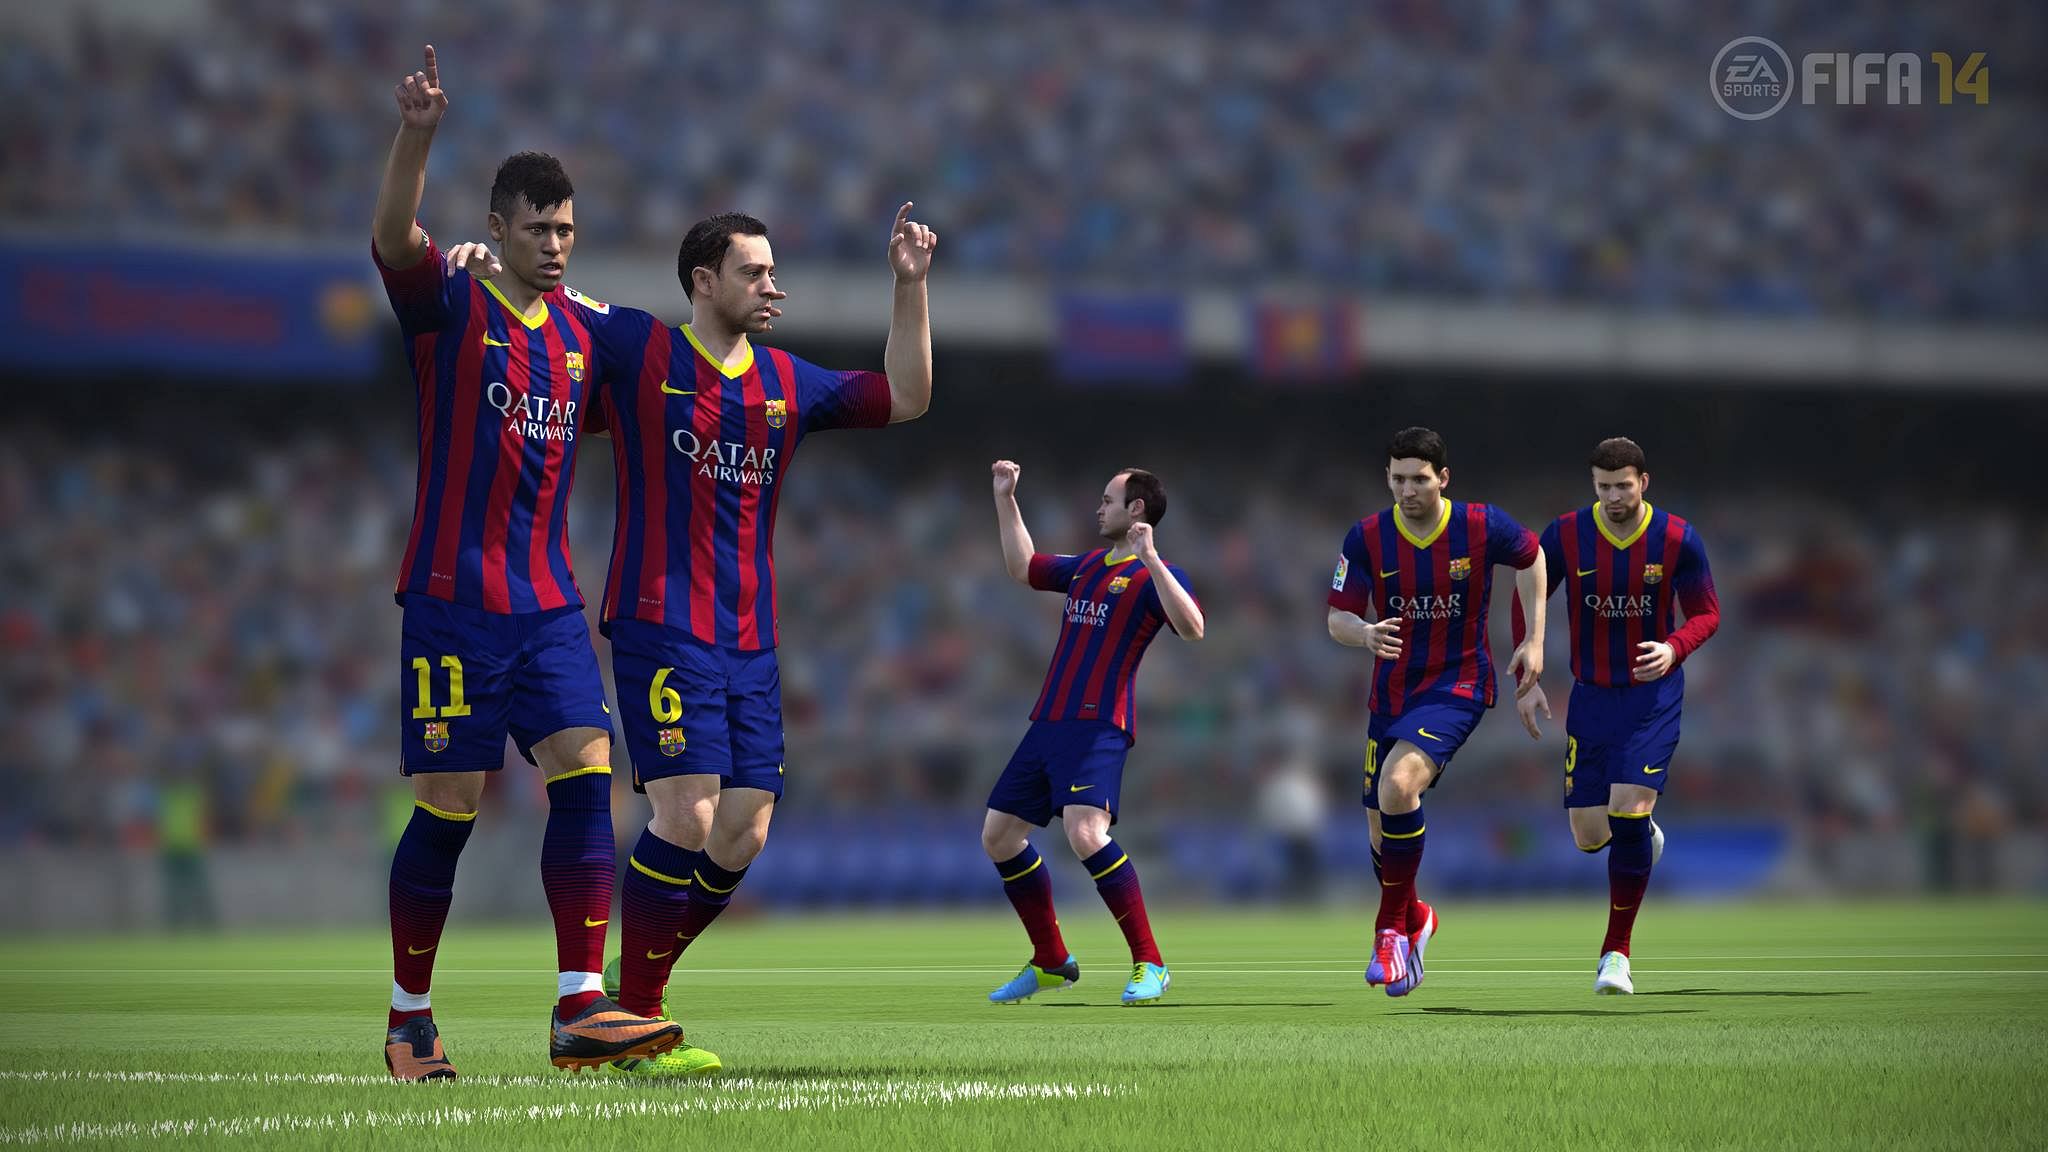 Play FIFA 14 as FC Barcelona on mobile telephones